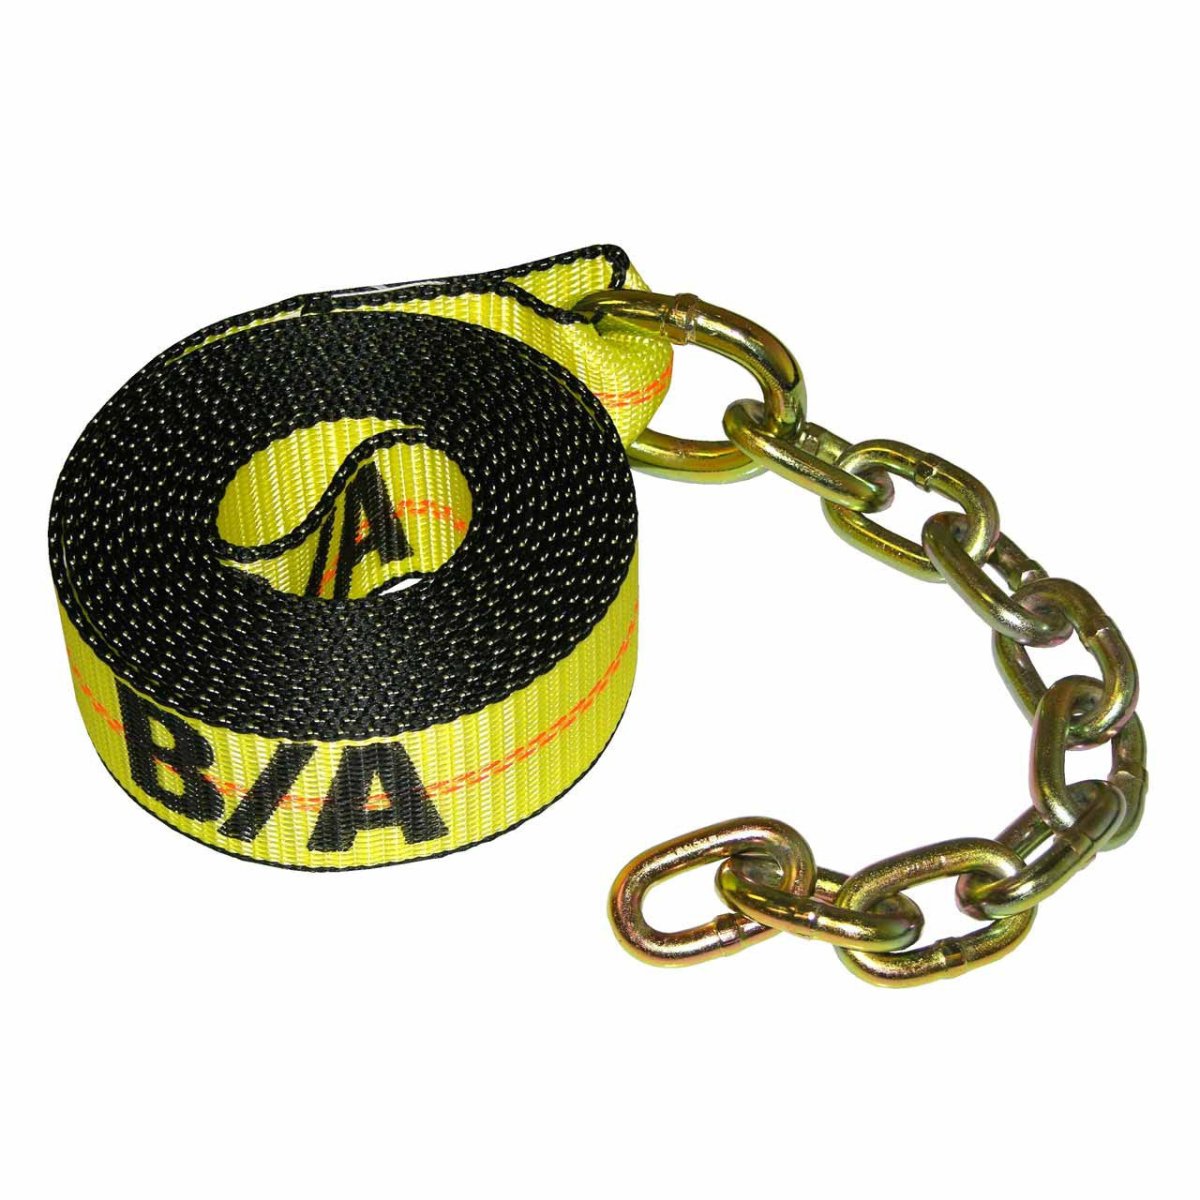 B/A Products Co. 2-Inch Chain Strap - starequipmentsales